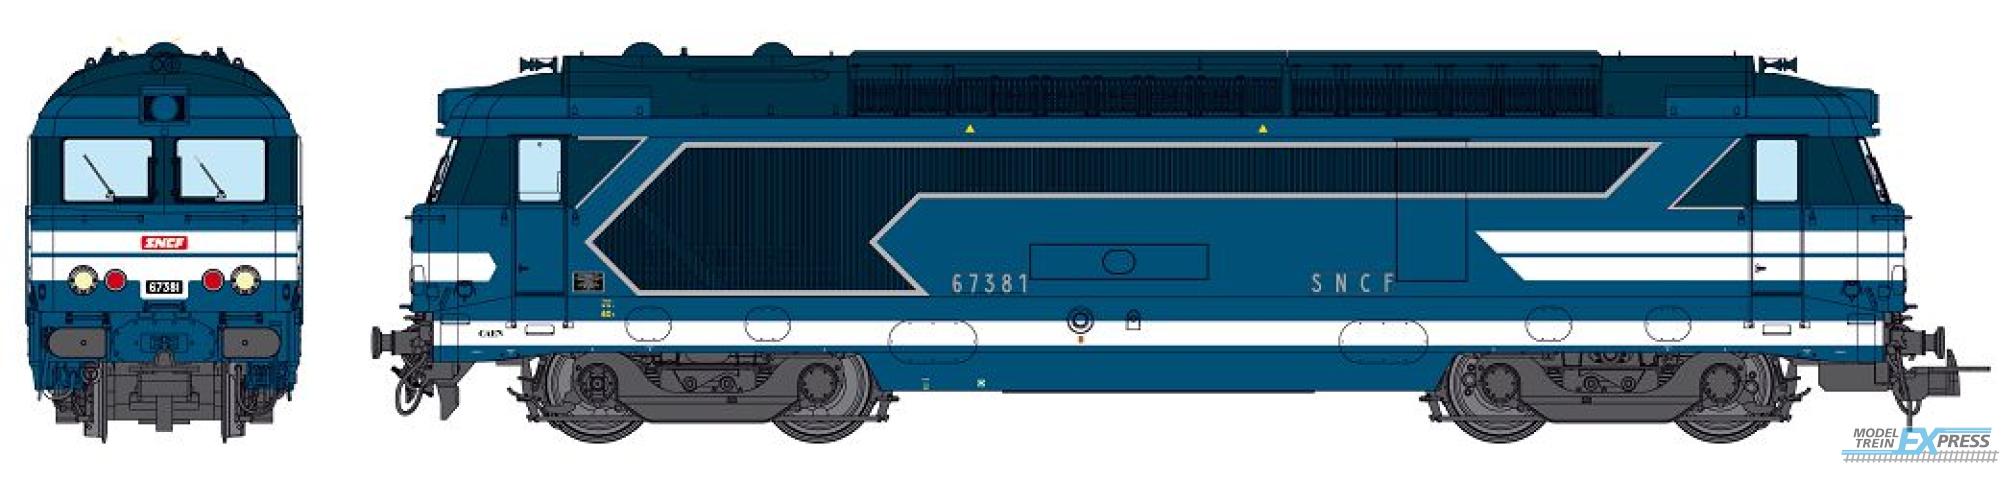 REE models MB-151SAC BB 67381 CAEN depot  Louvers and additional red headligths Era IV - AC Sound & Smoke